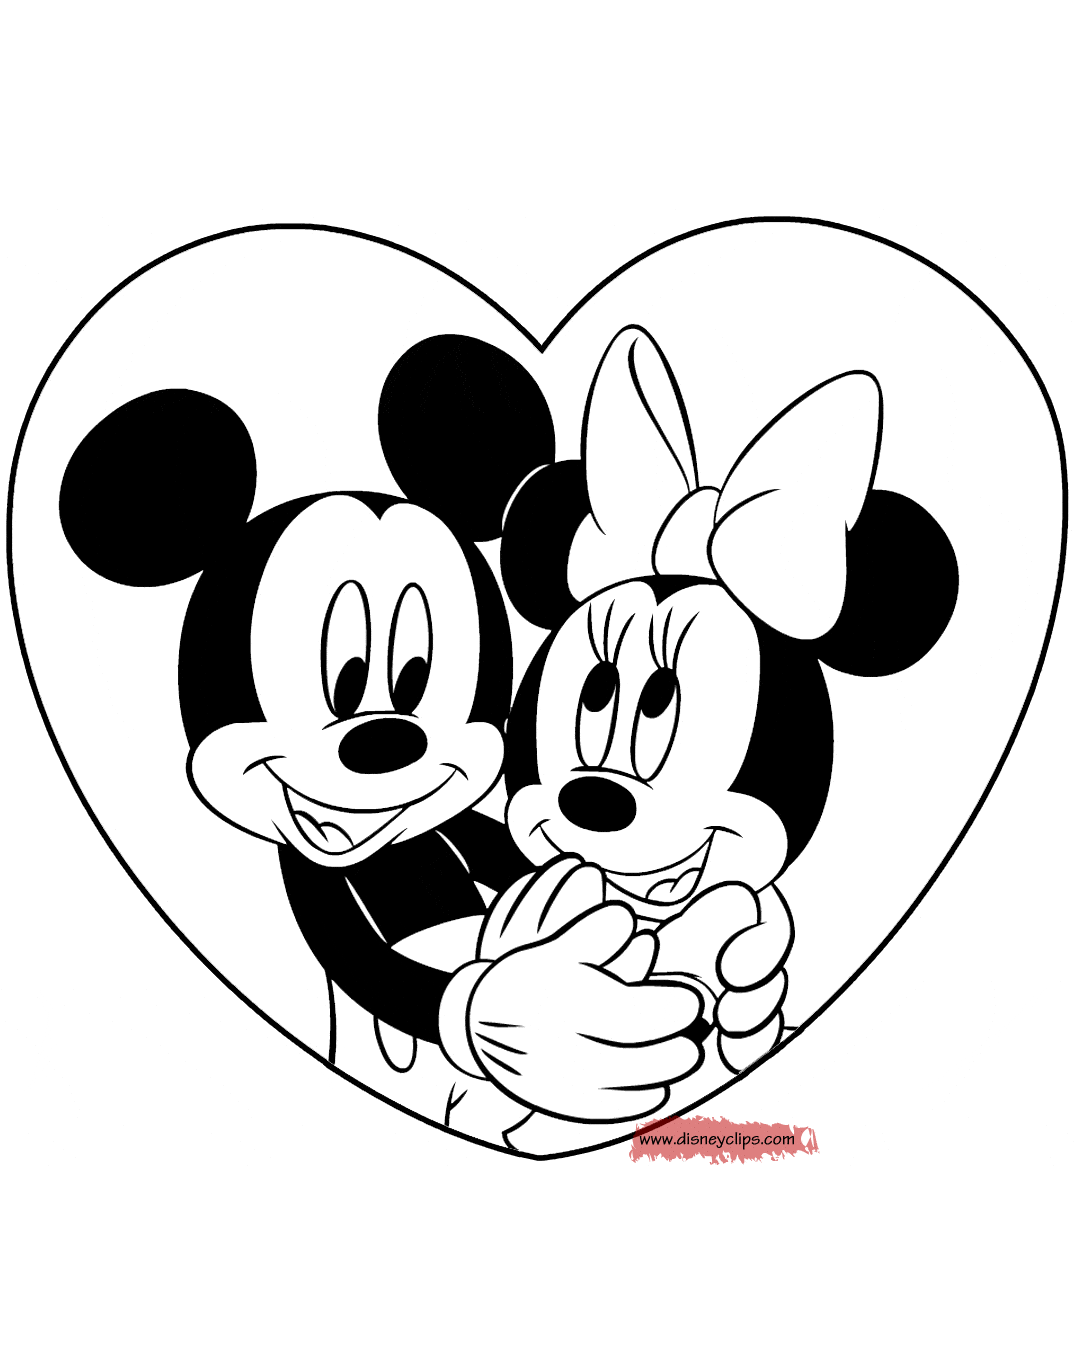 coloring page Mickey and Minnie in love